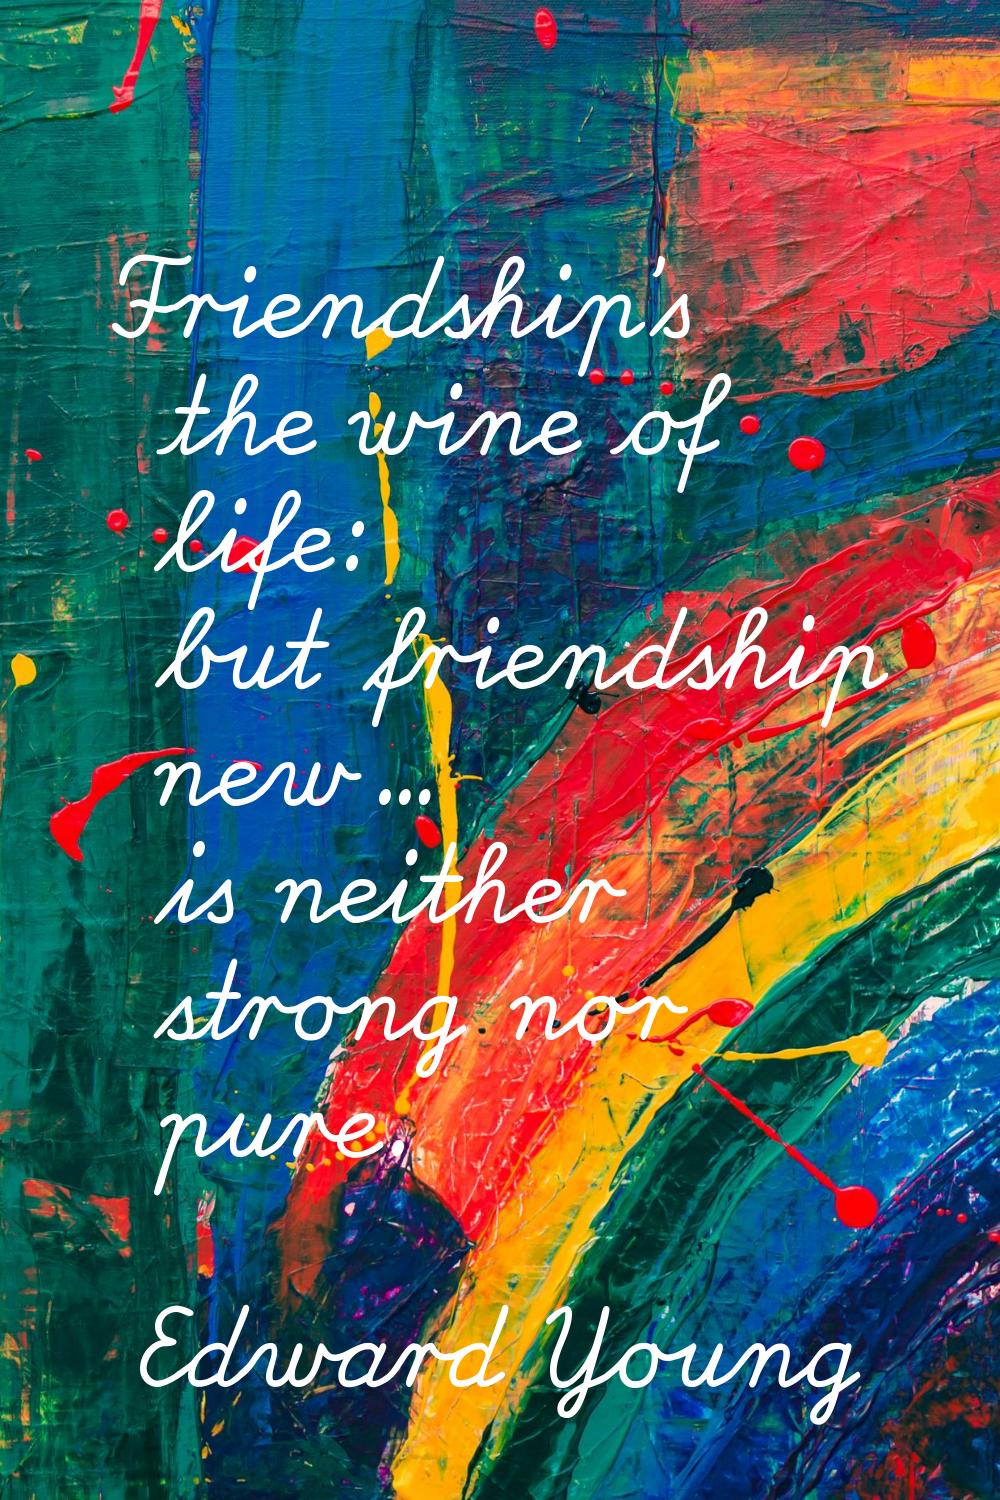 Friendship's the wine of life: but friendship new... is neither strong nor pure.